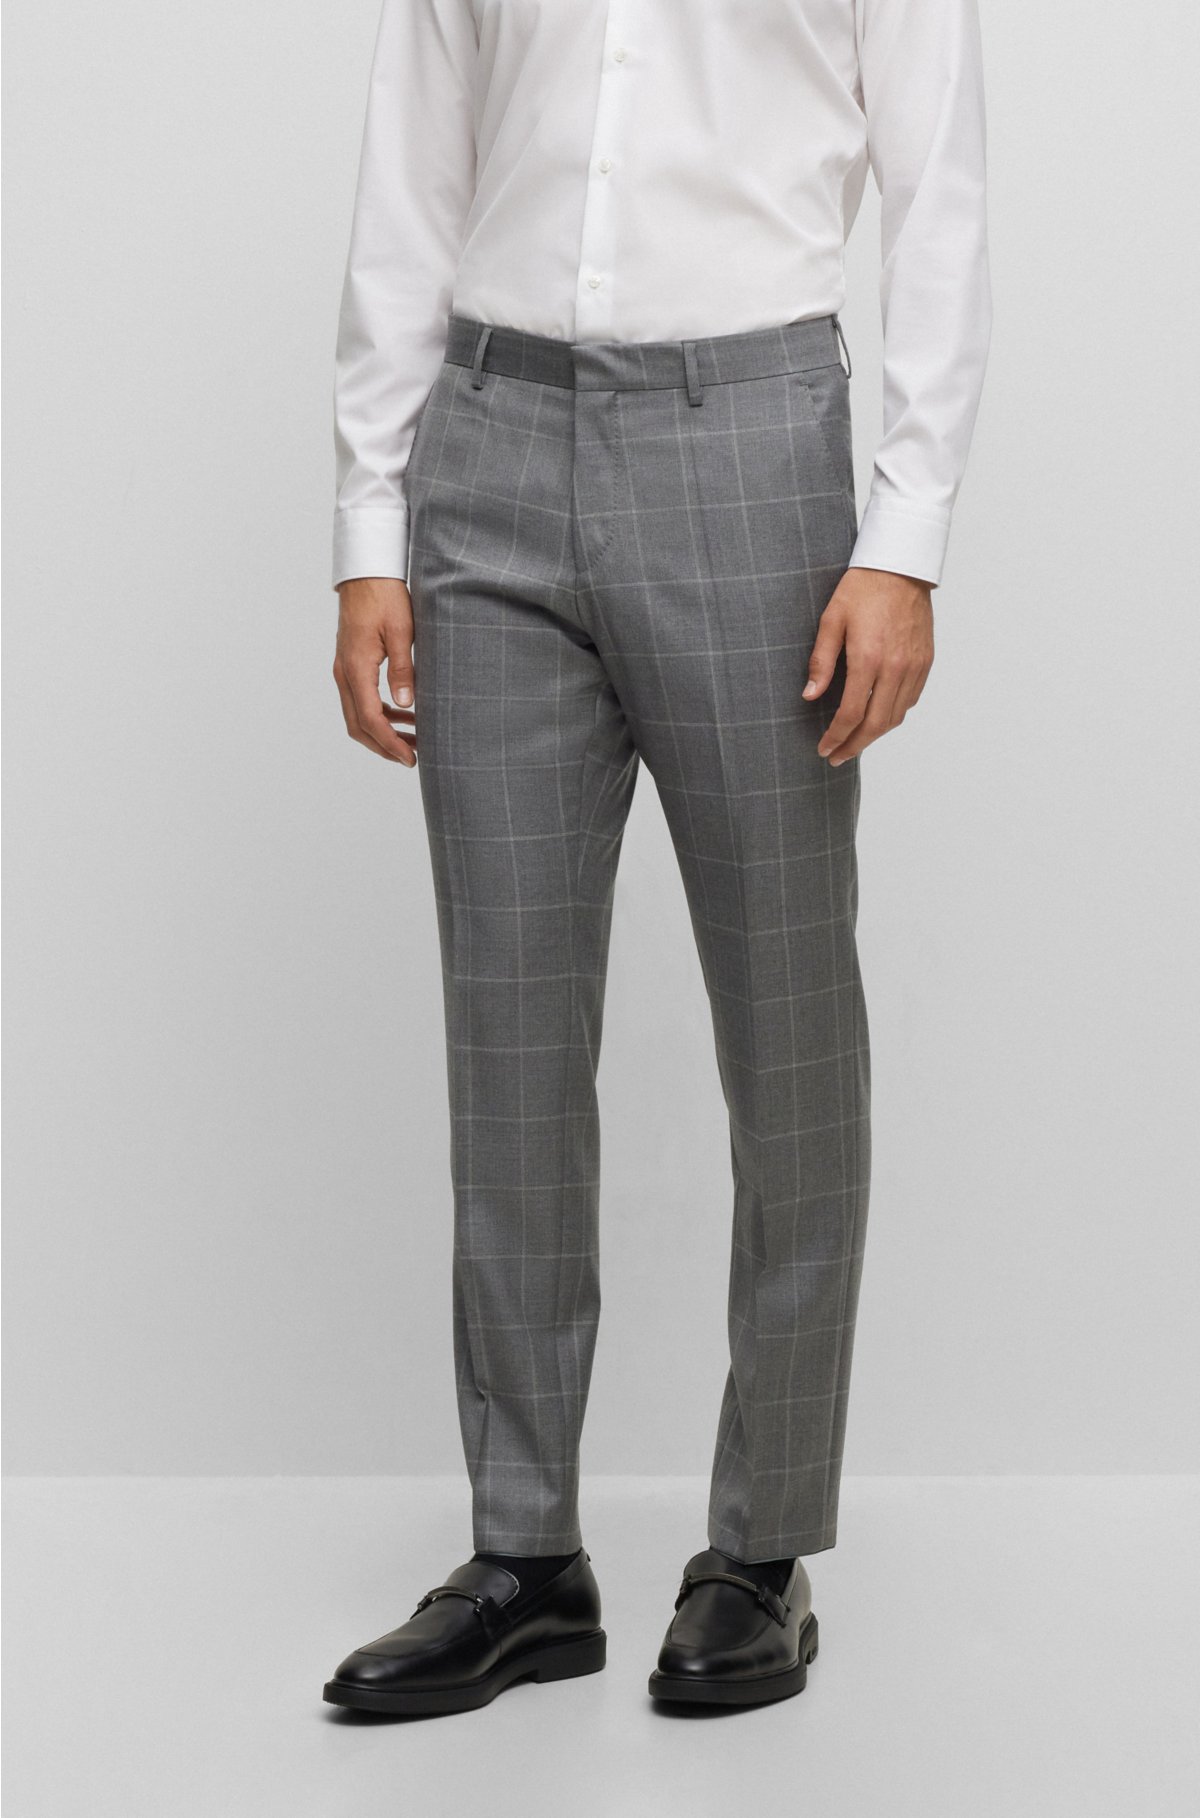 Men's Plaid Dress Pants Casual Slim Fit Checkered Business Trousers White  30 